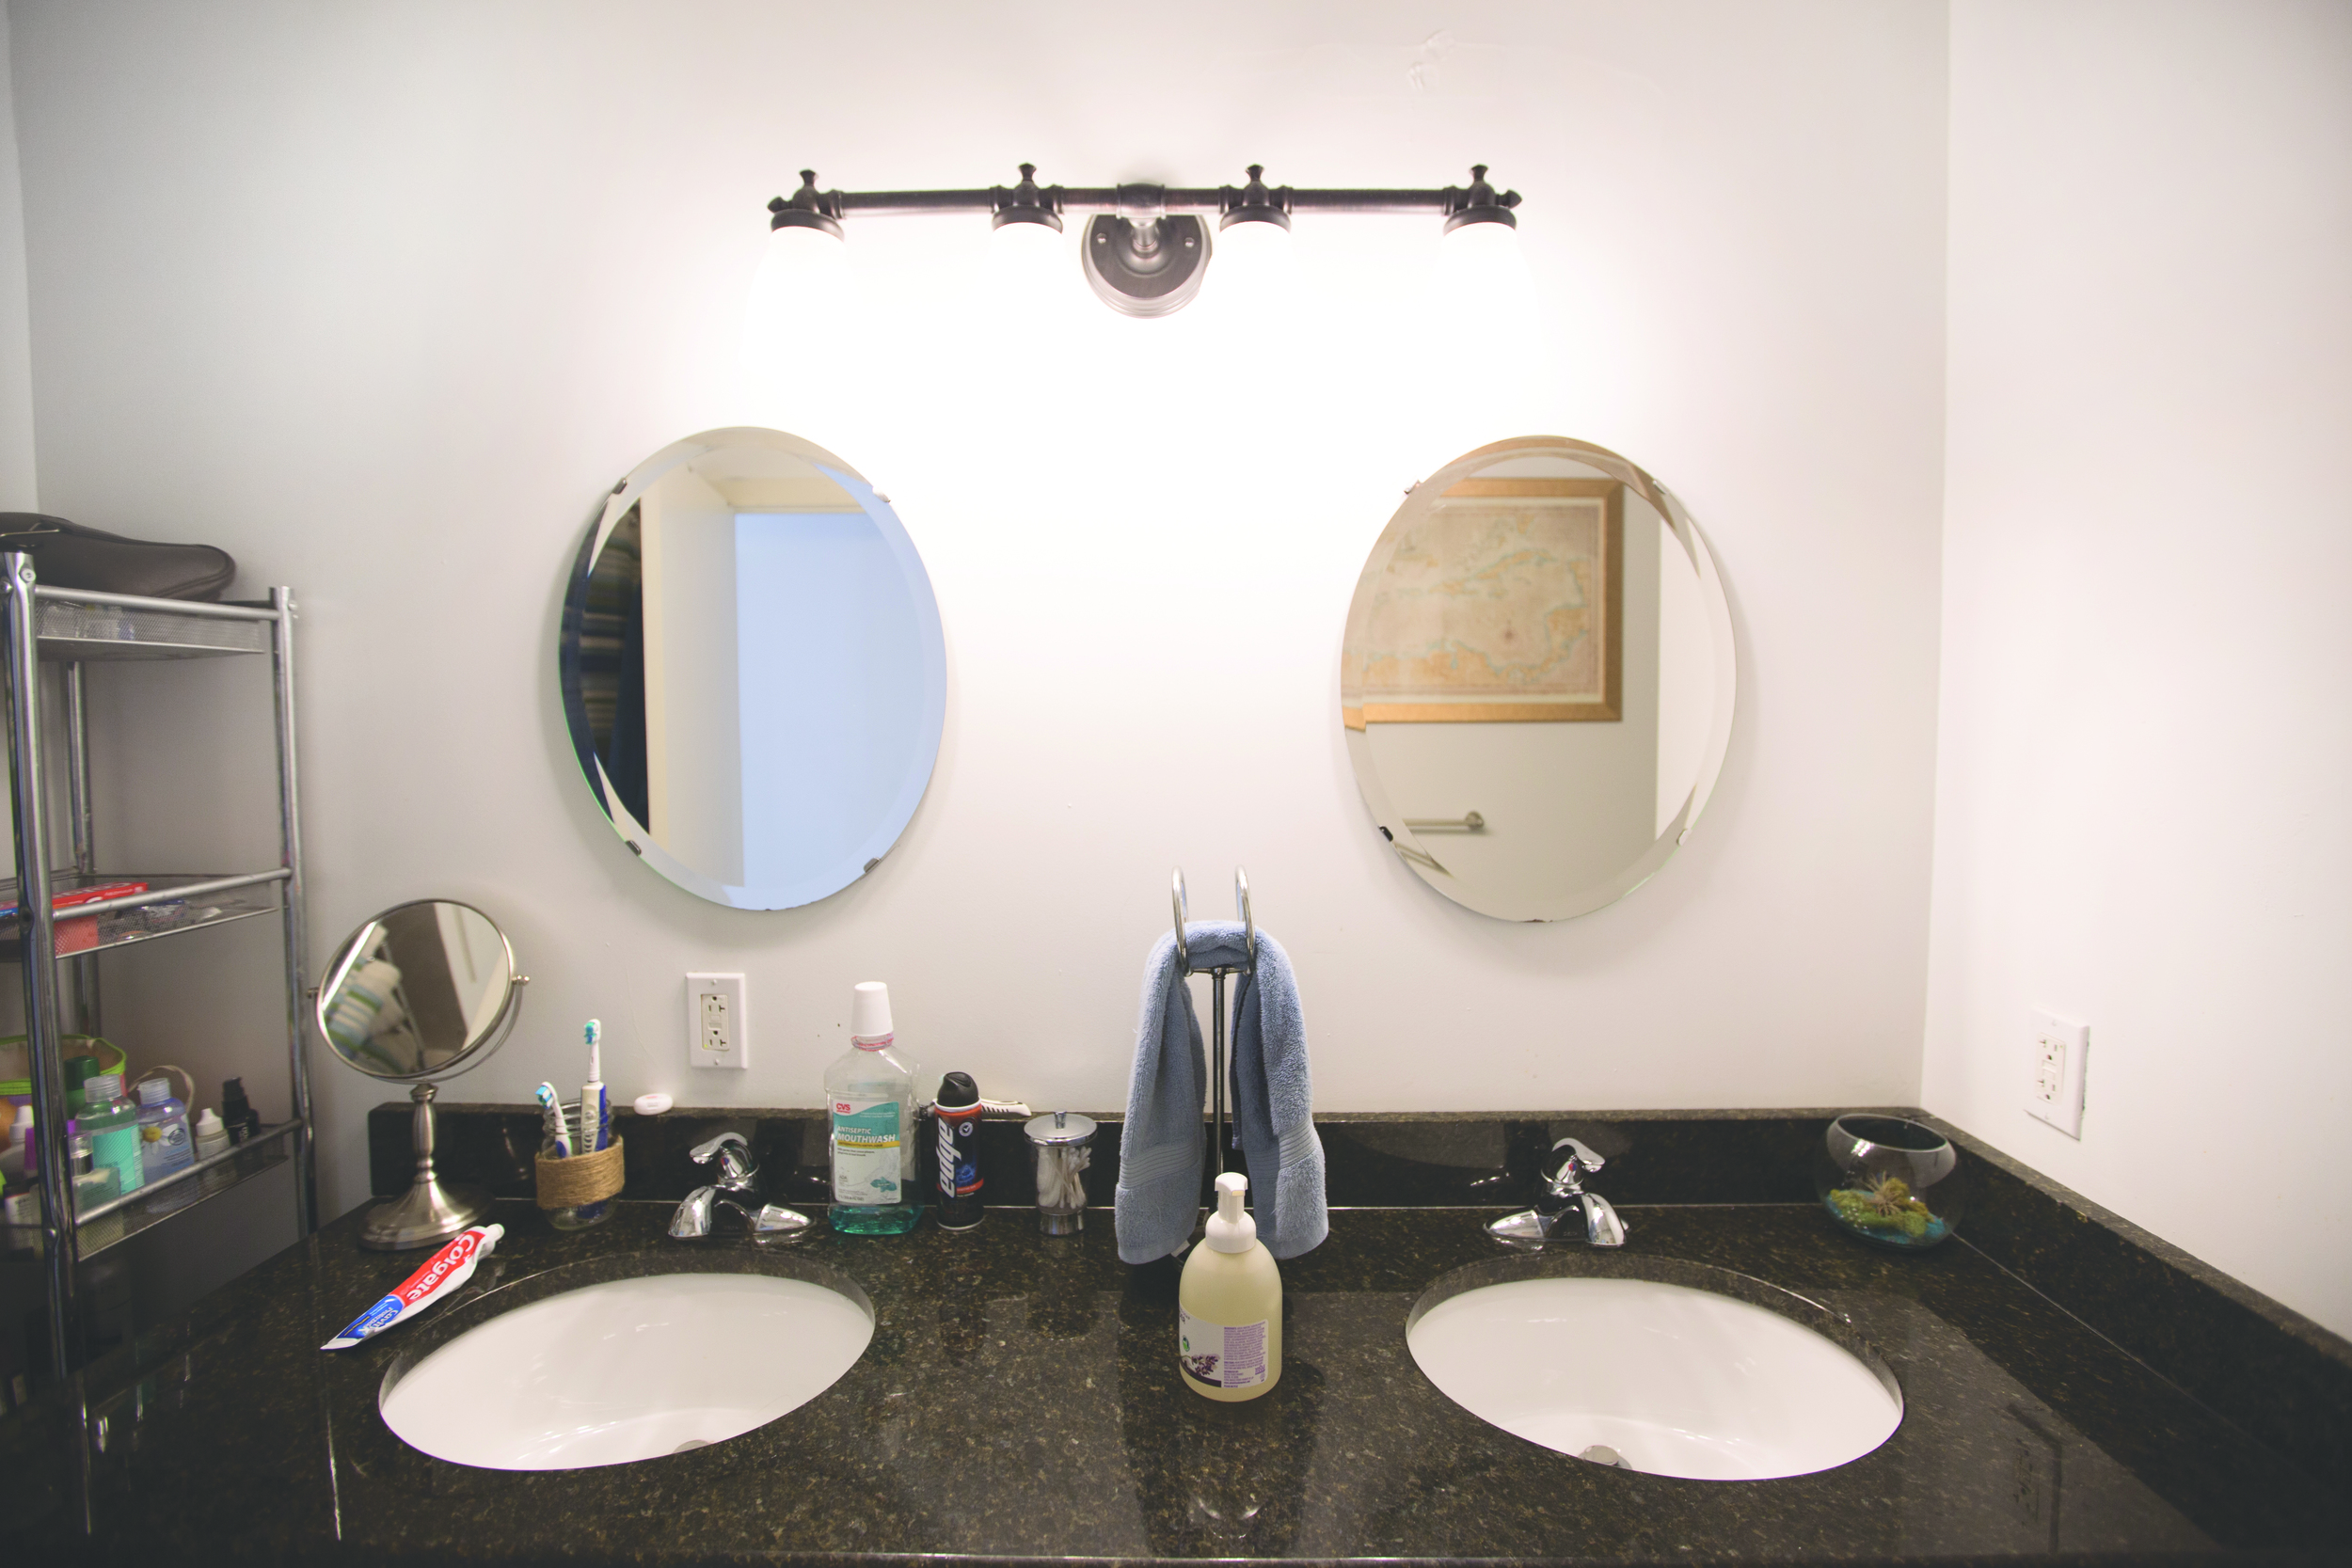 The shared bathroom space of Art Museum resident Krista Pfleger. Krista's sink is on the right.